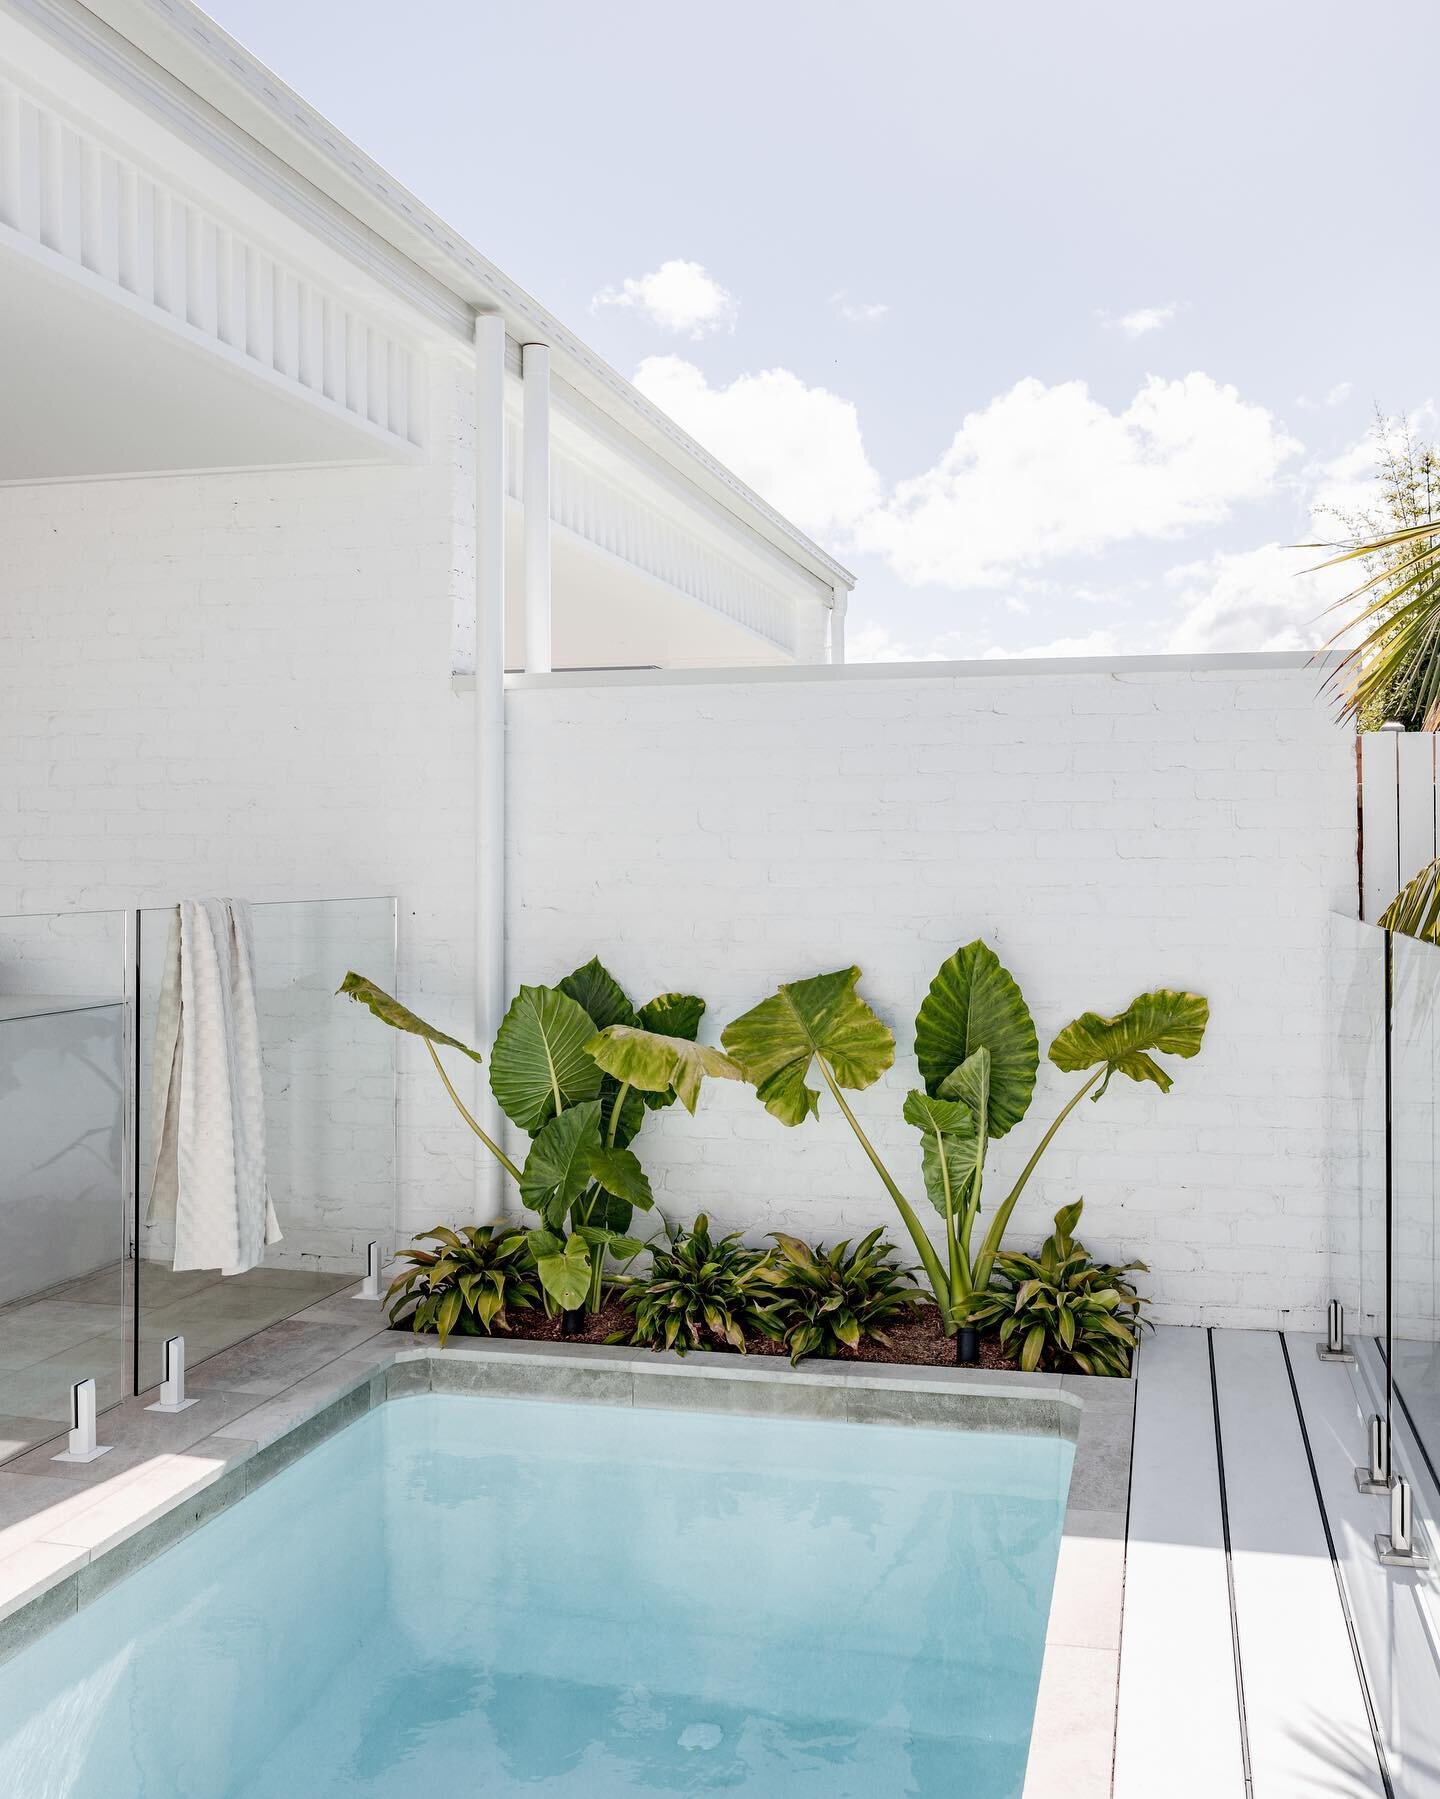 Woonona Duplex by @hs.building 

Wouldn&rsquo;t be complete without the inclusion of twin plungies @plungie.australia 

The open-plan design of this duplex seamlessly connects to generous alfresco areas, complementing the plunge pools surrounded by l